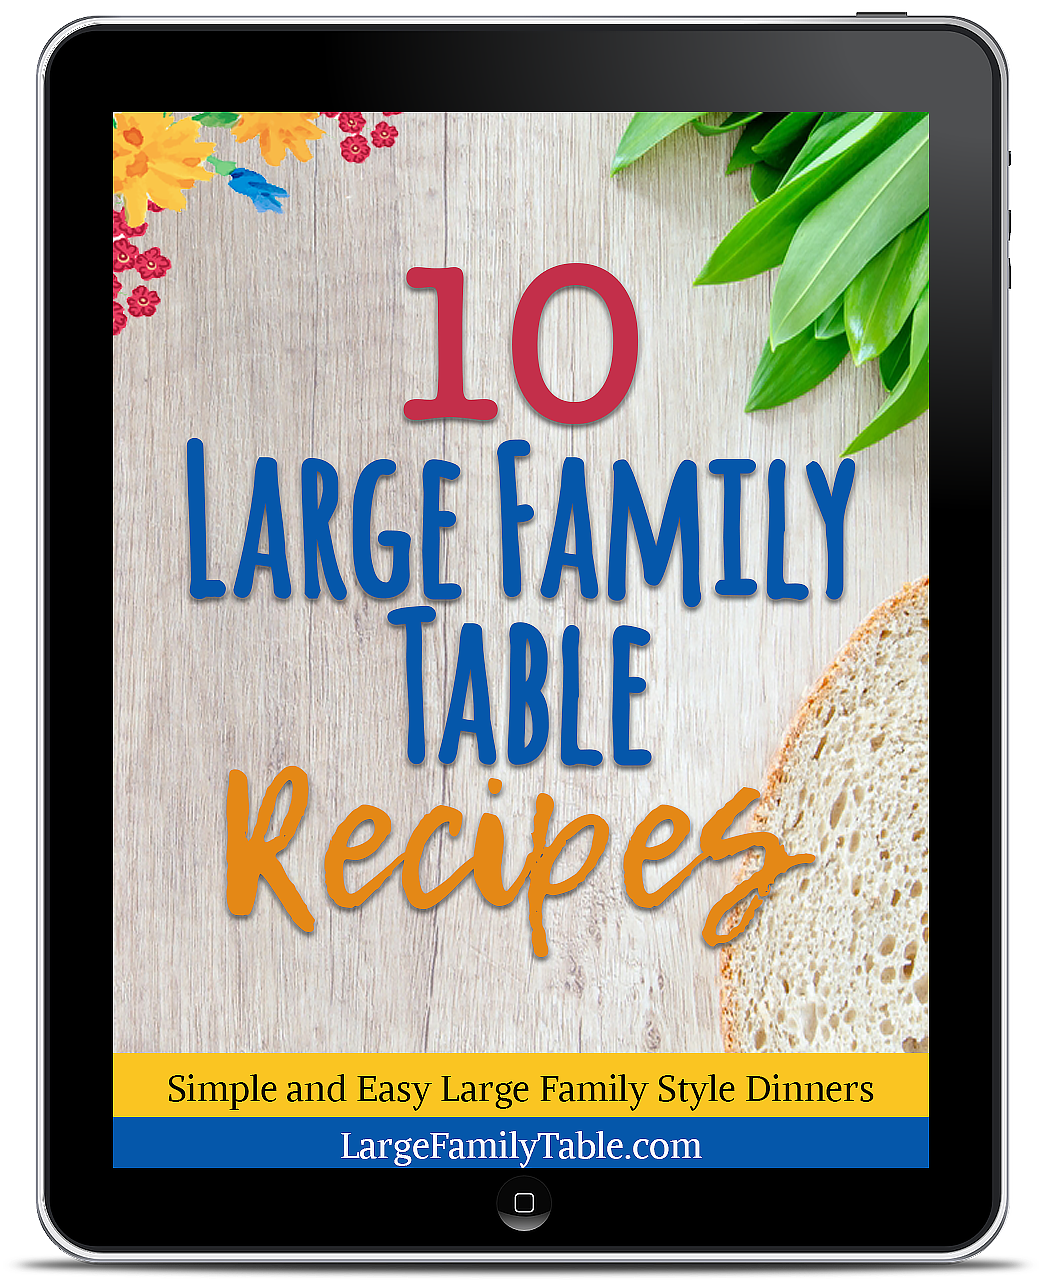 10 large family table recipes